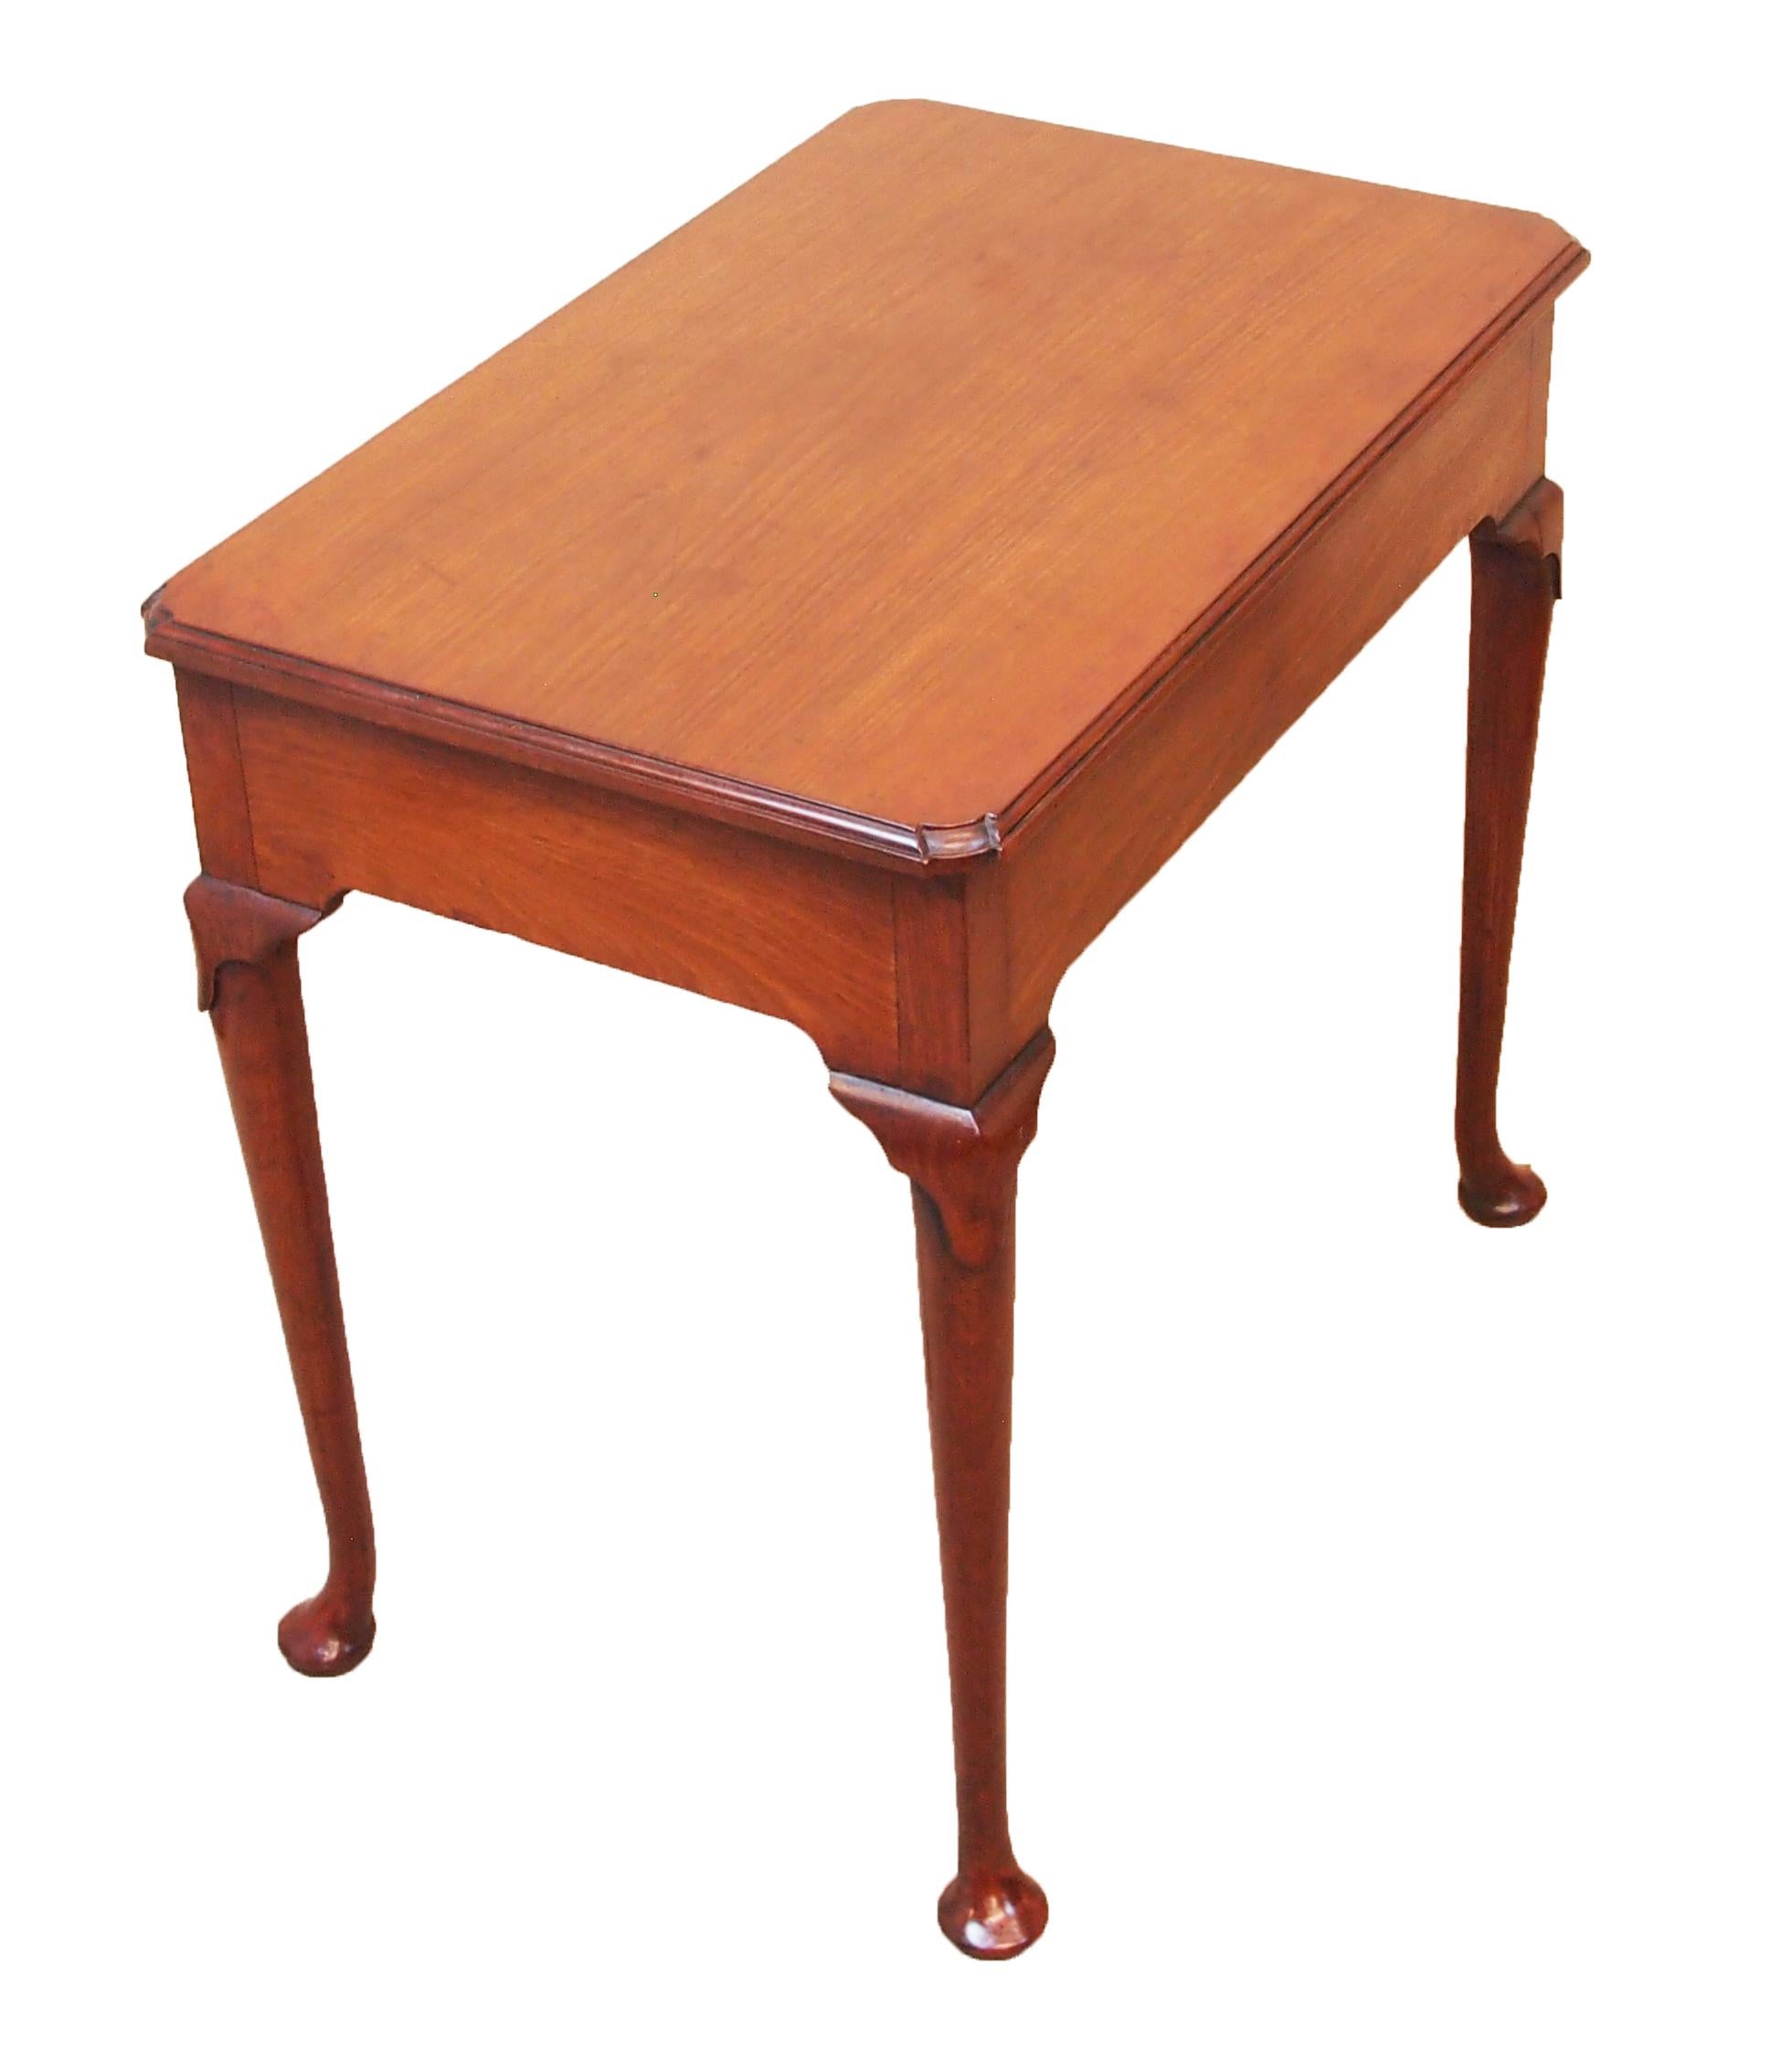 A very attractive 18th century George II Period walnut side.
Table, retaining warm patina and colour throughout, having
well figured top with re-entrant corners above one frieze.
Drawer raised on elegant cabriole legs
Terminating on original pad